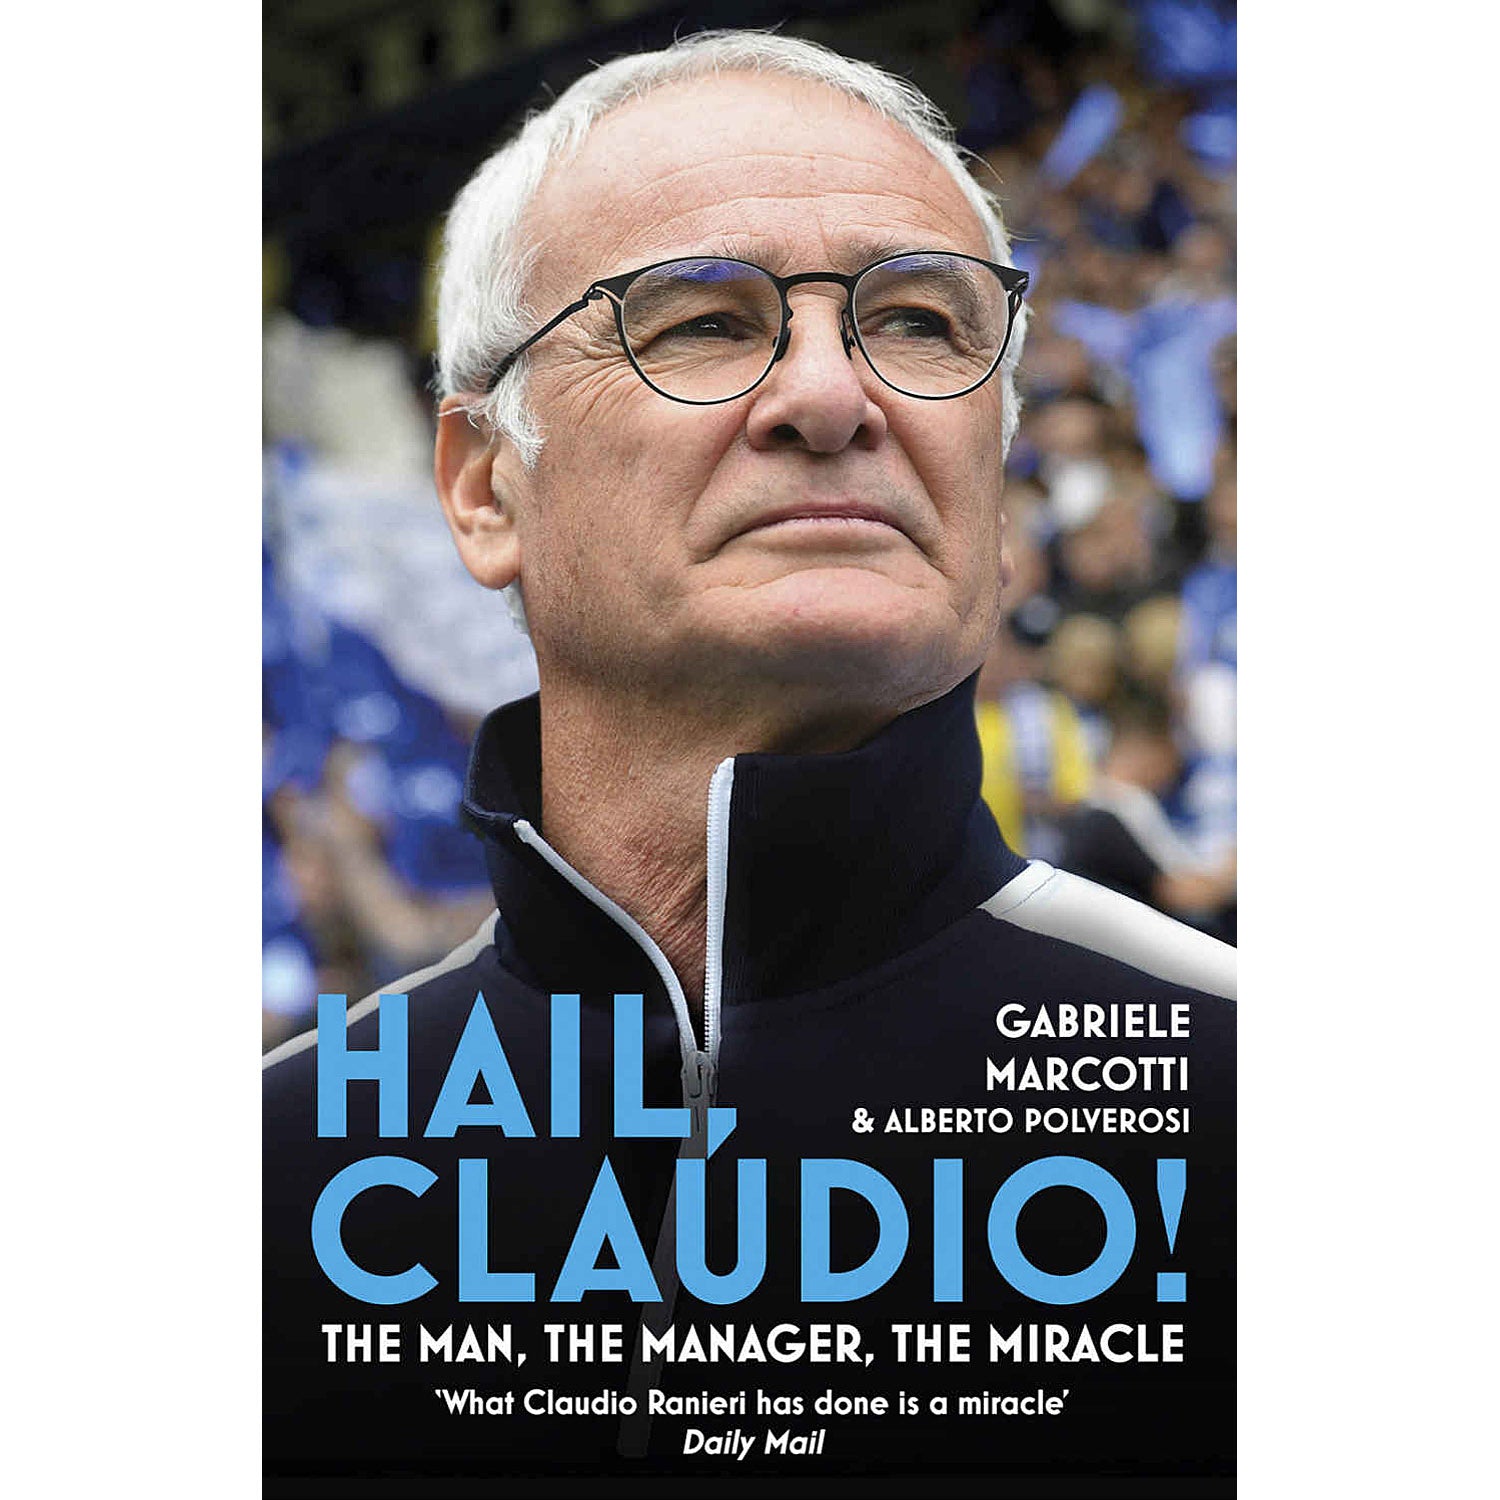 Hail Claudio! The Man, The Manager, The Miracle – Claudio Ranieri